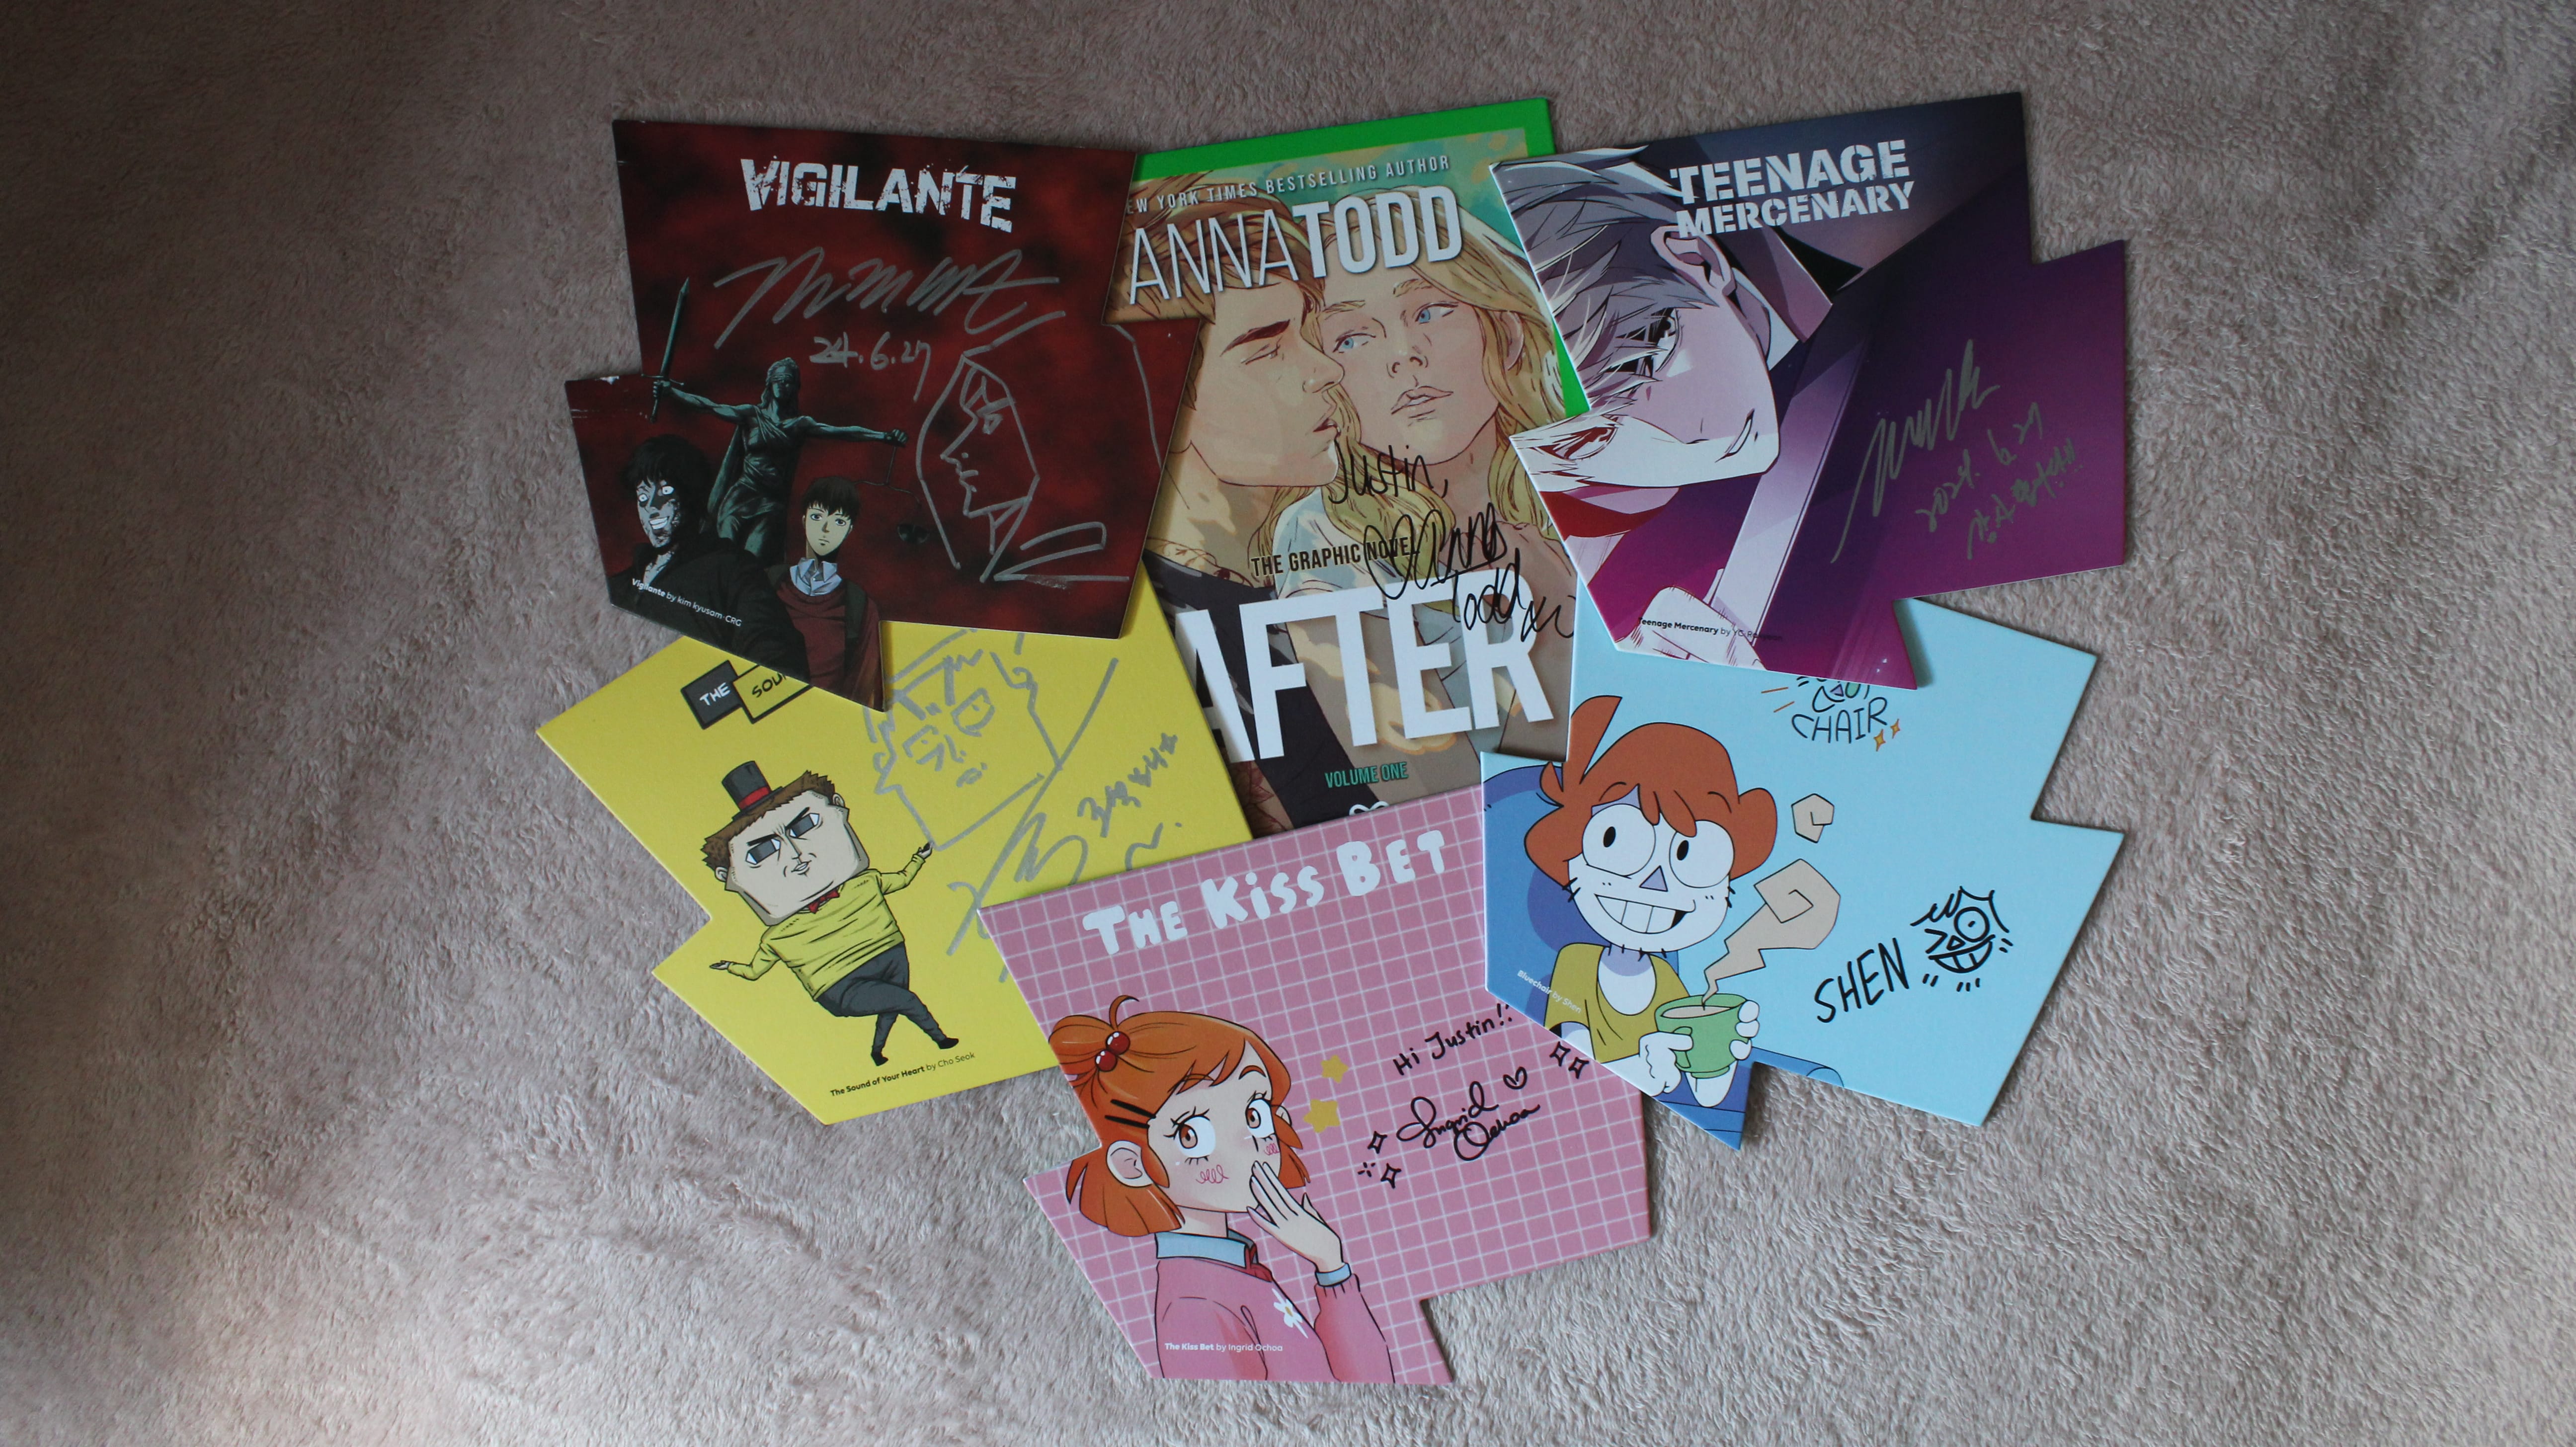 Autographs from the creators present at the TOON SQUARE event 